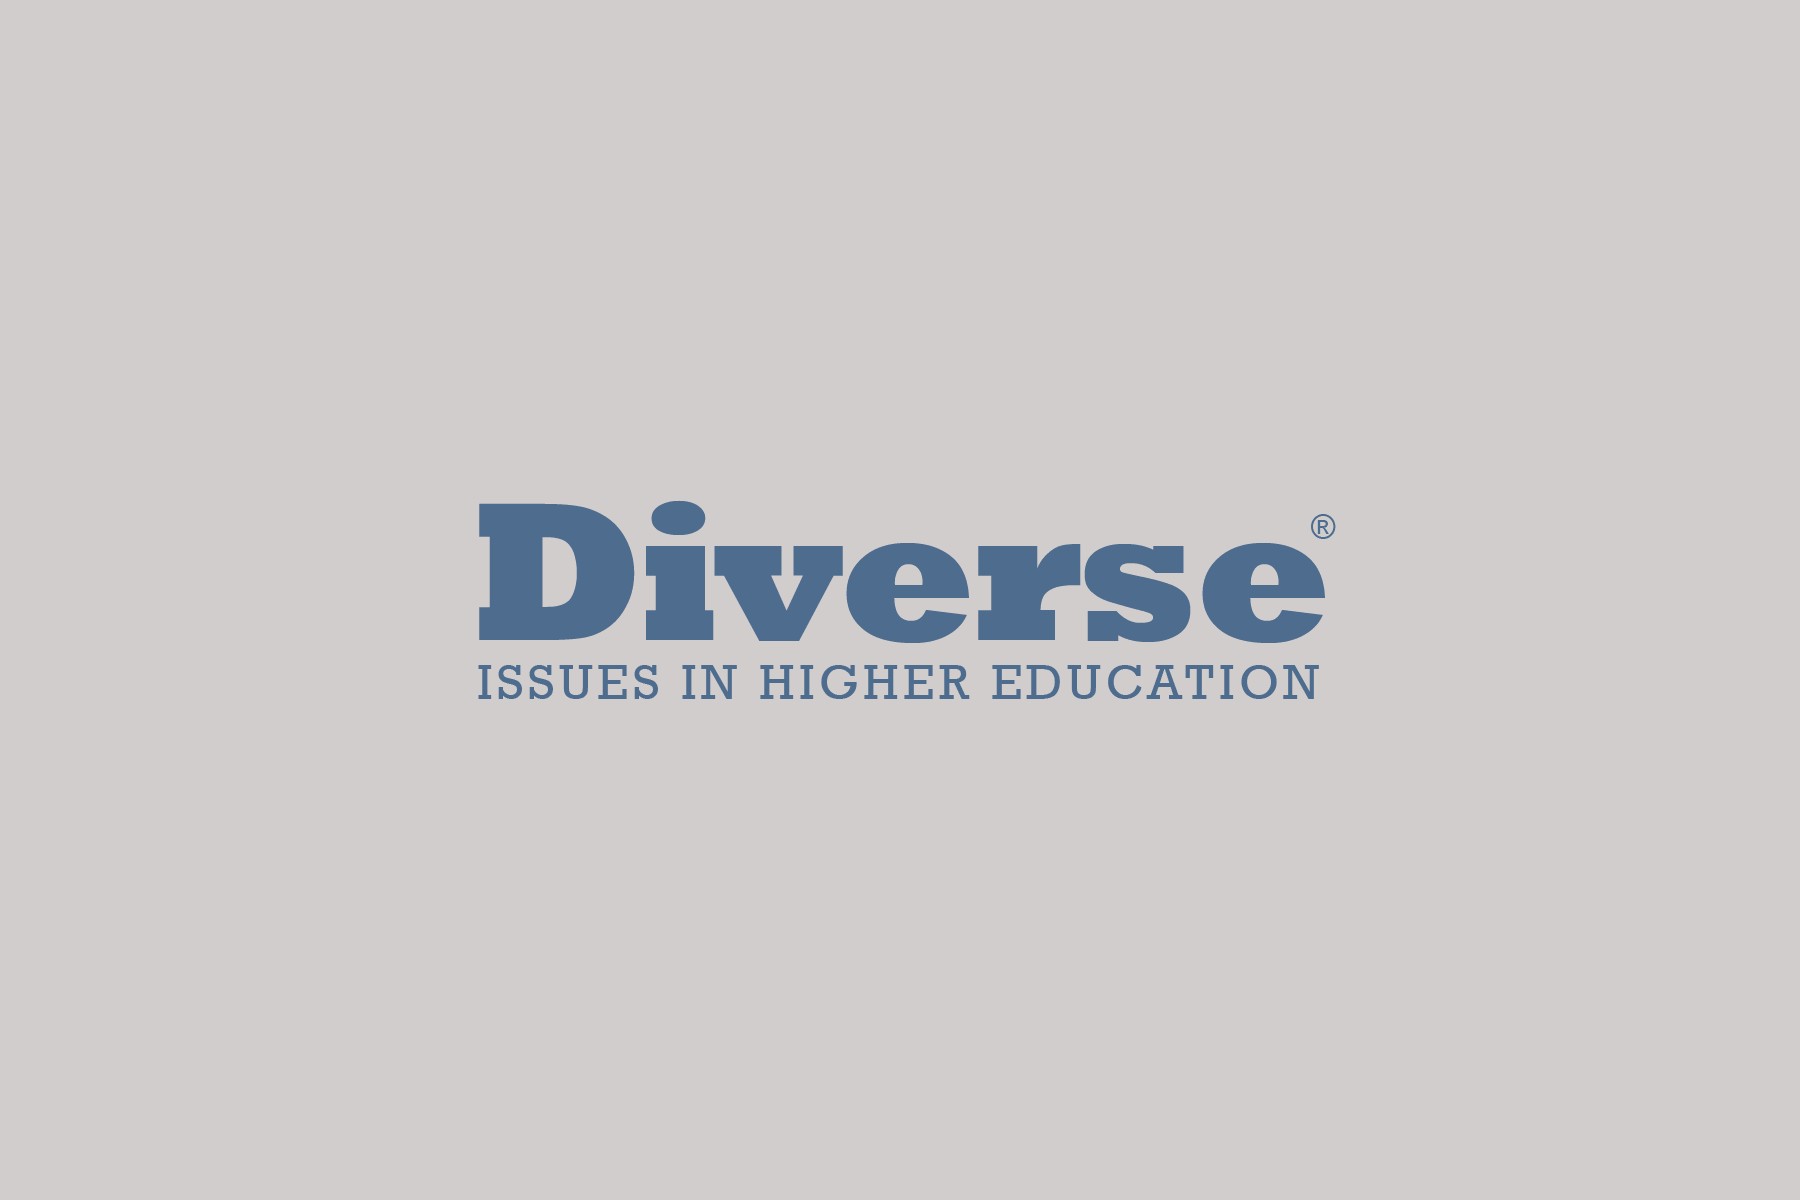 diverse-issues-education-logo